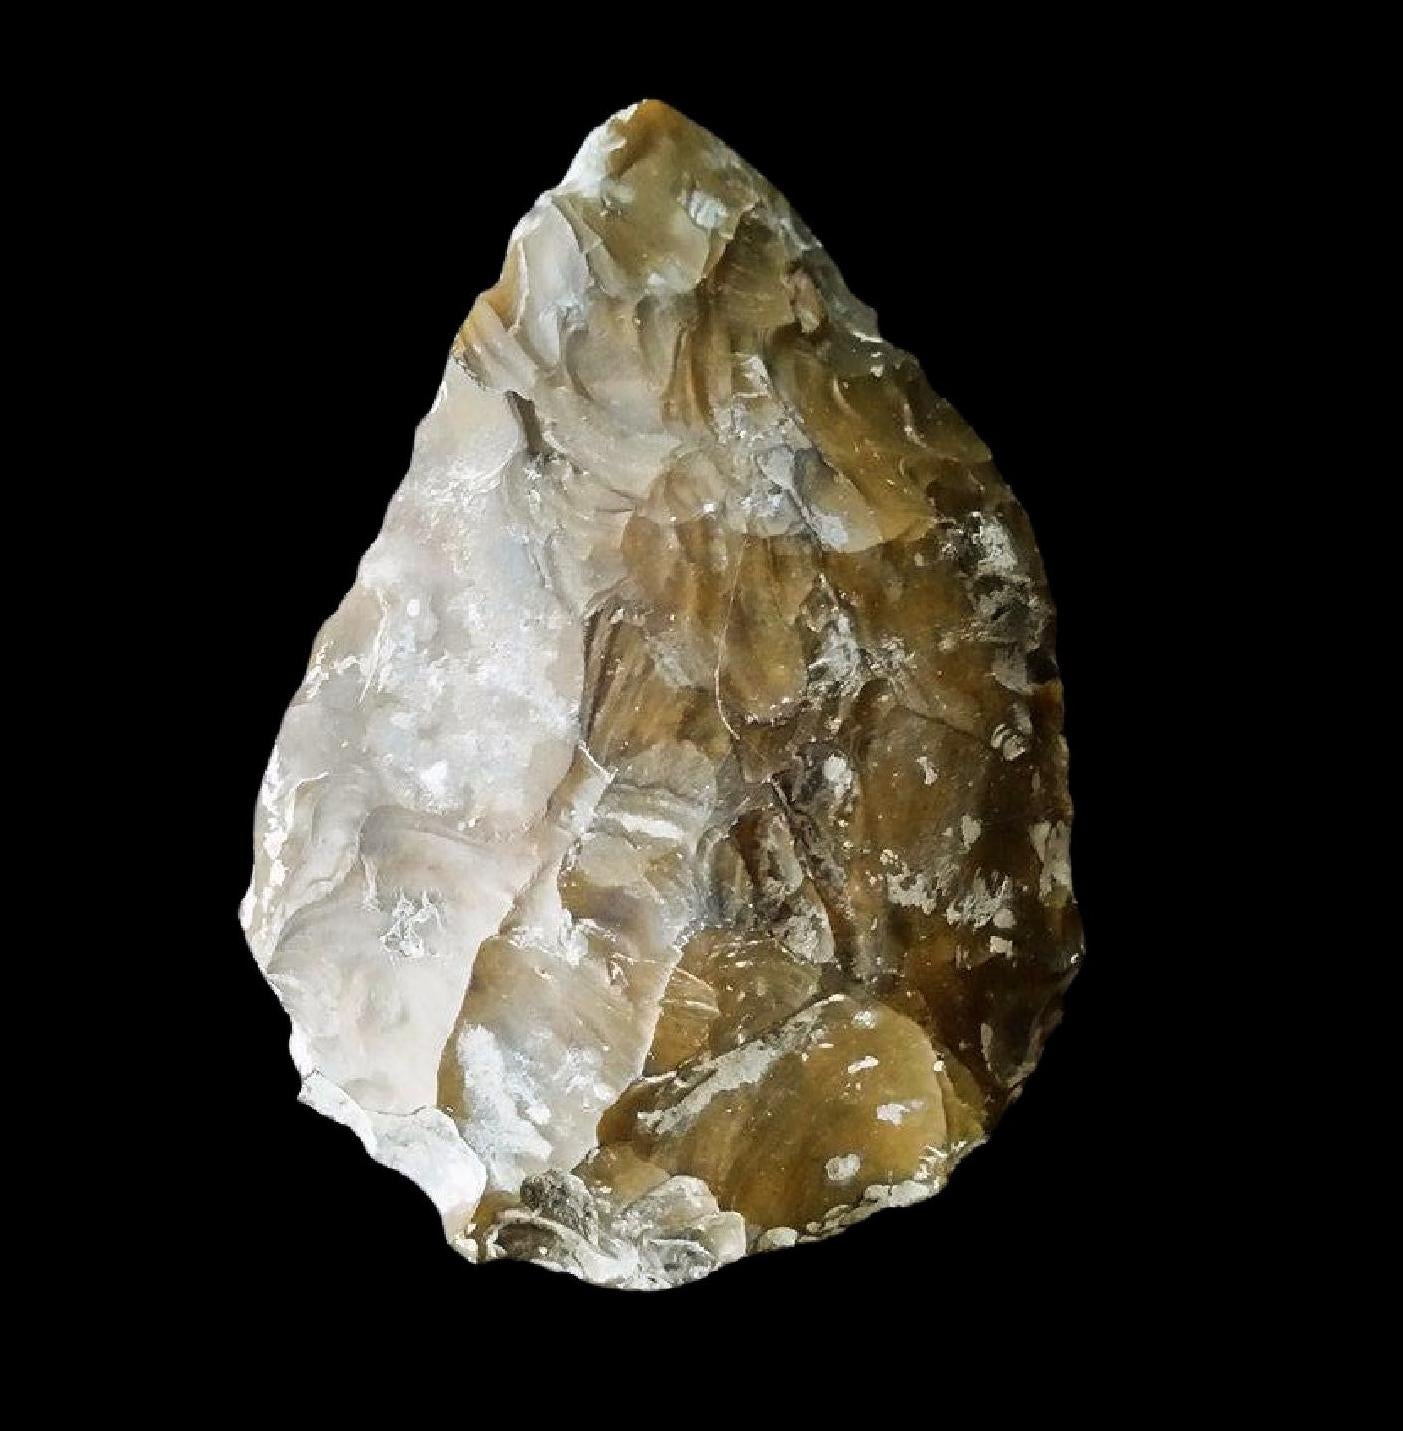 The Neanderthal hand axe found at the site.  (Image: DigVentures)